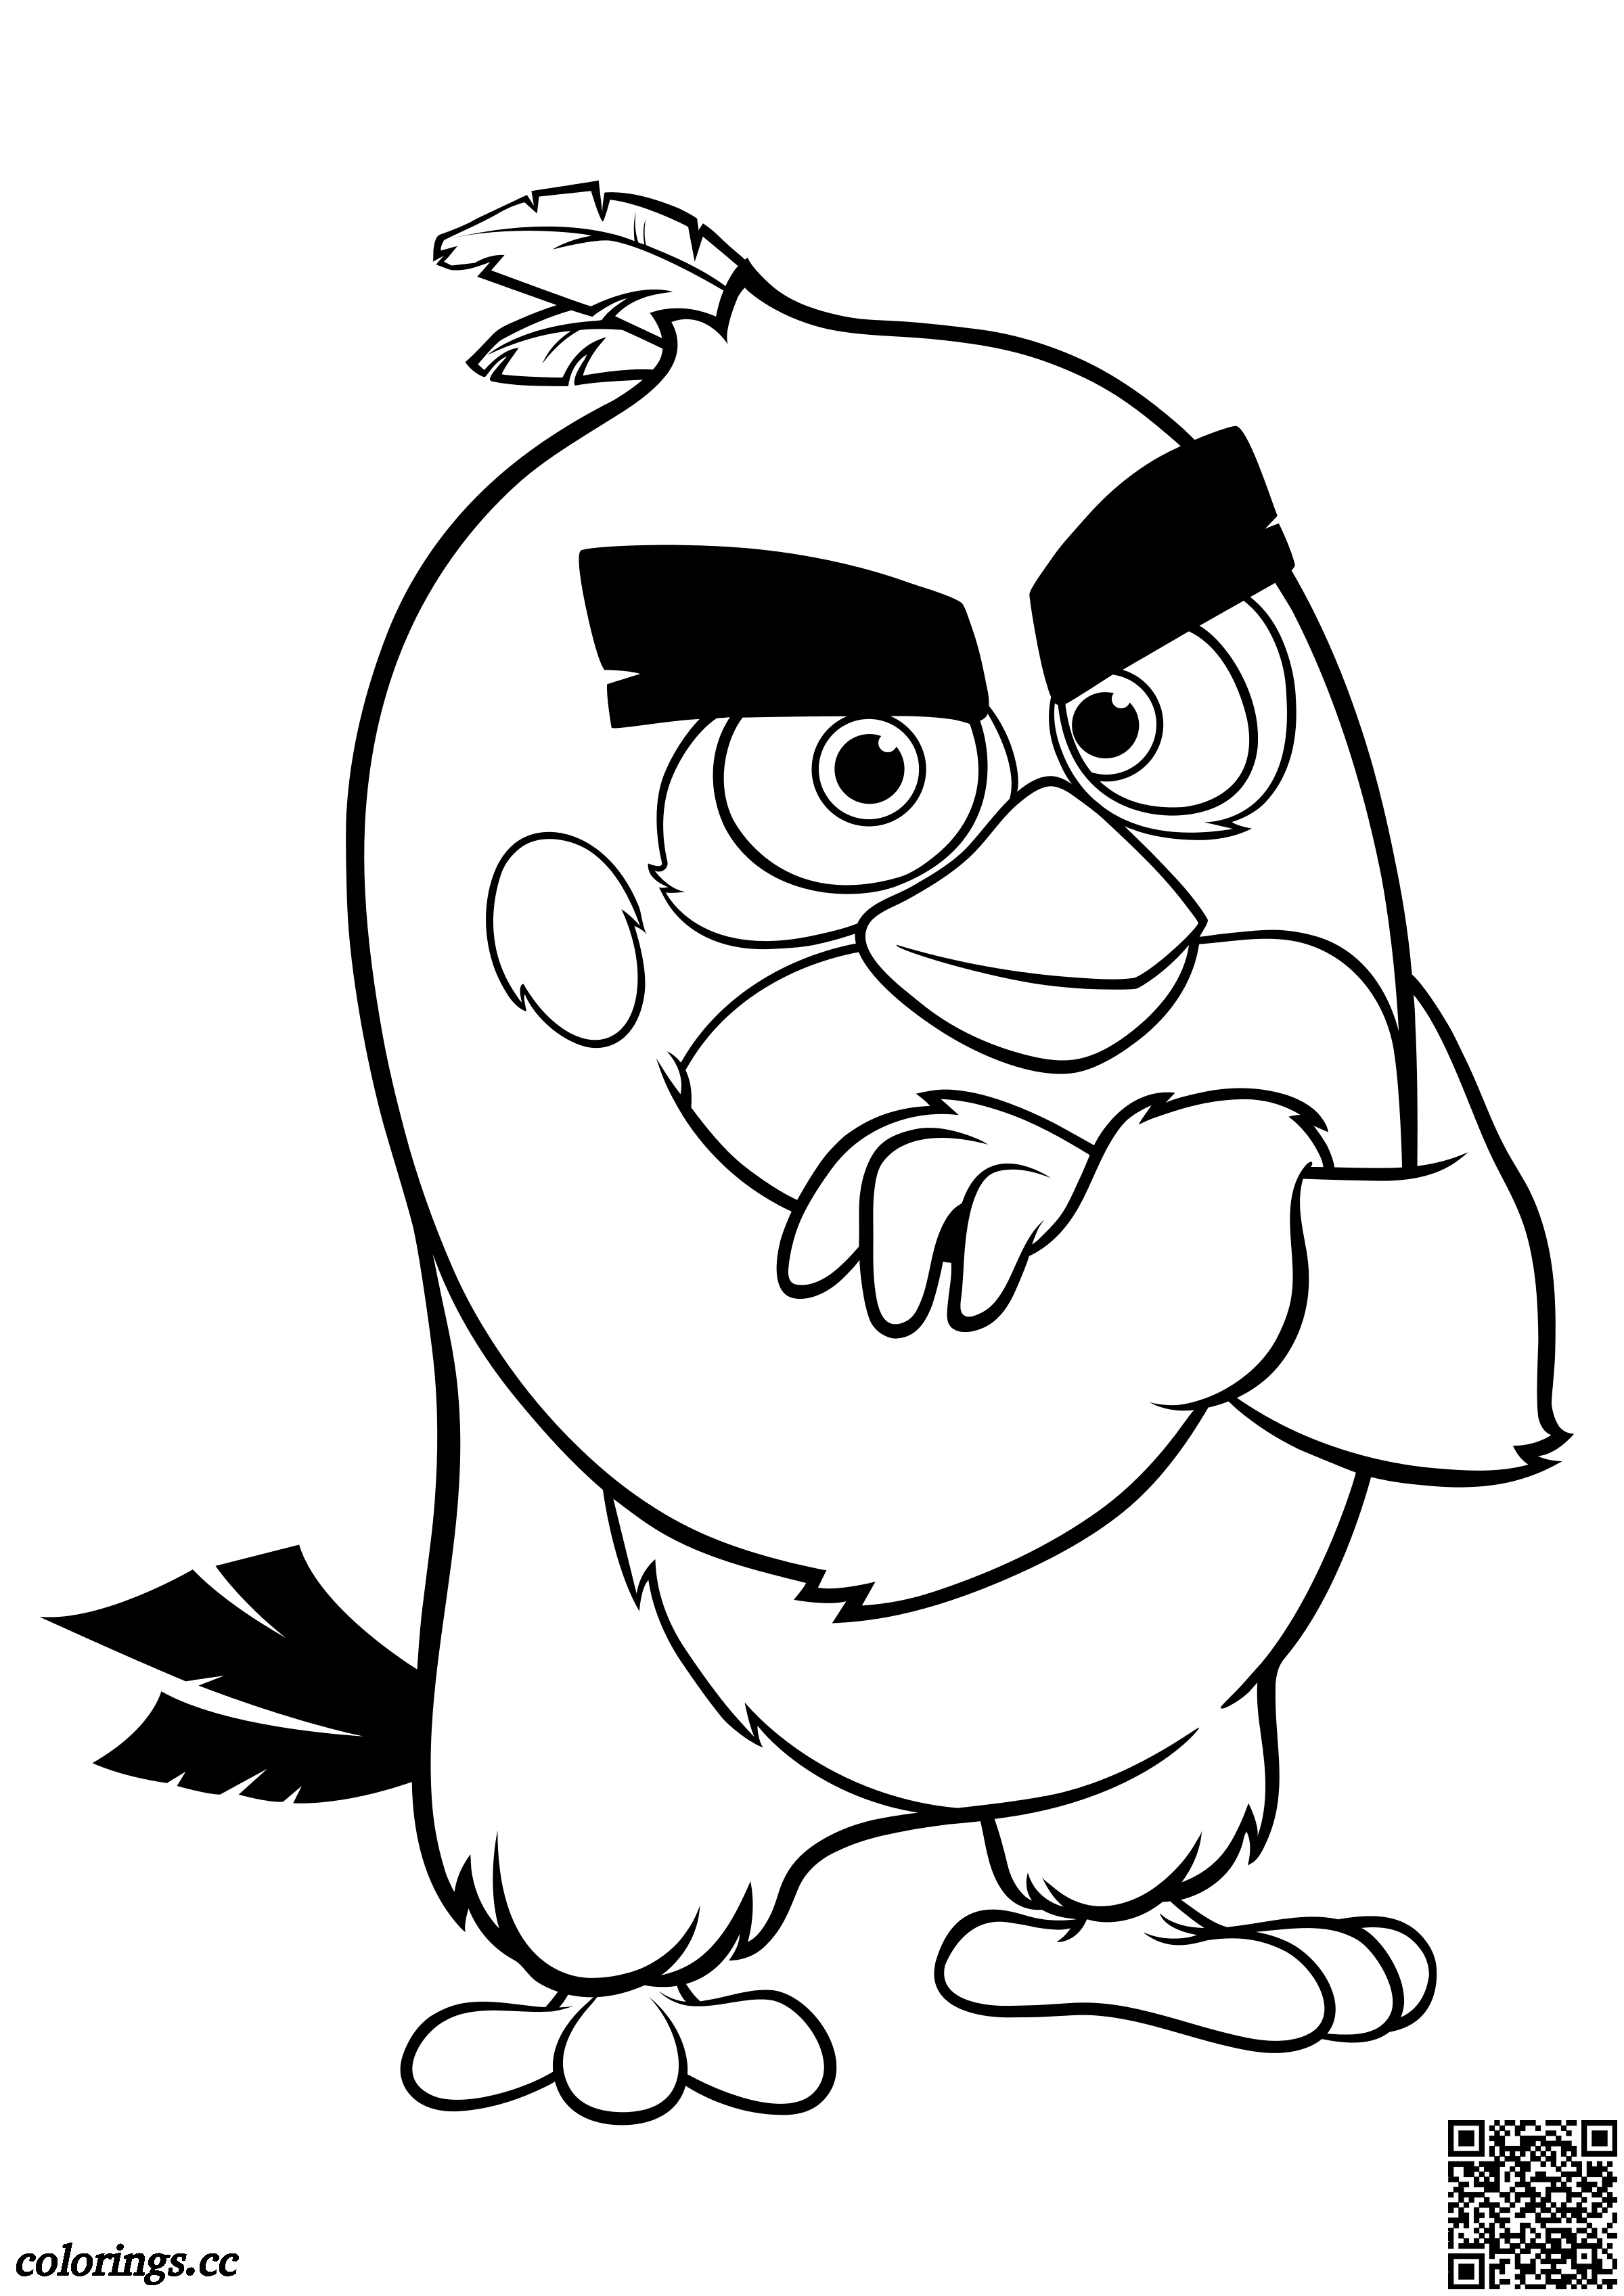 Severe Red coloring pages, Angry Birds in the movies coloring ...